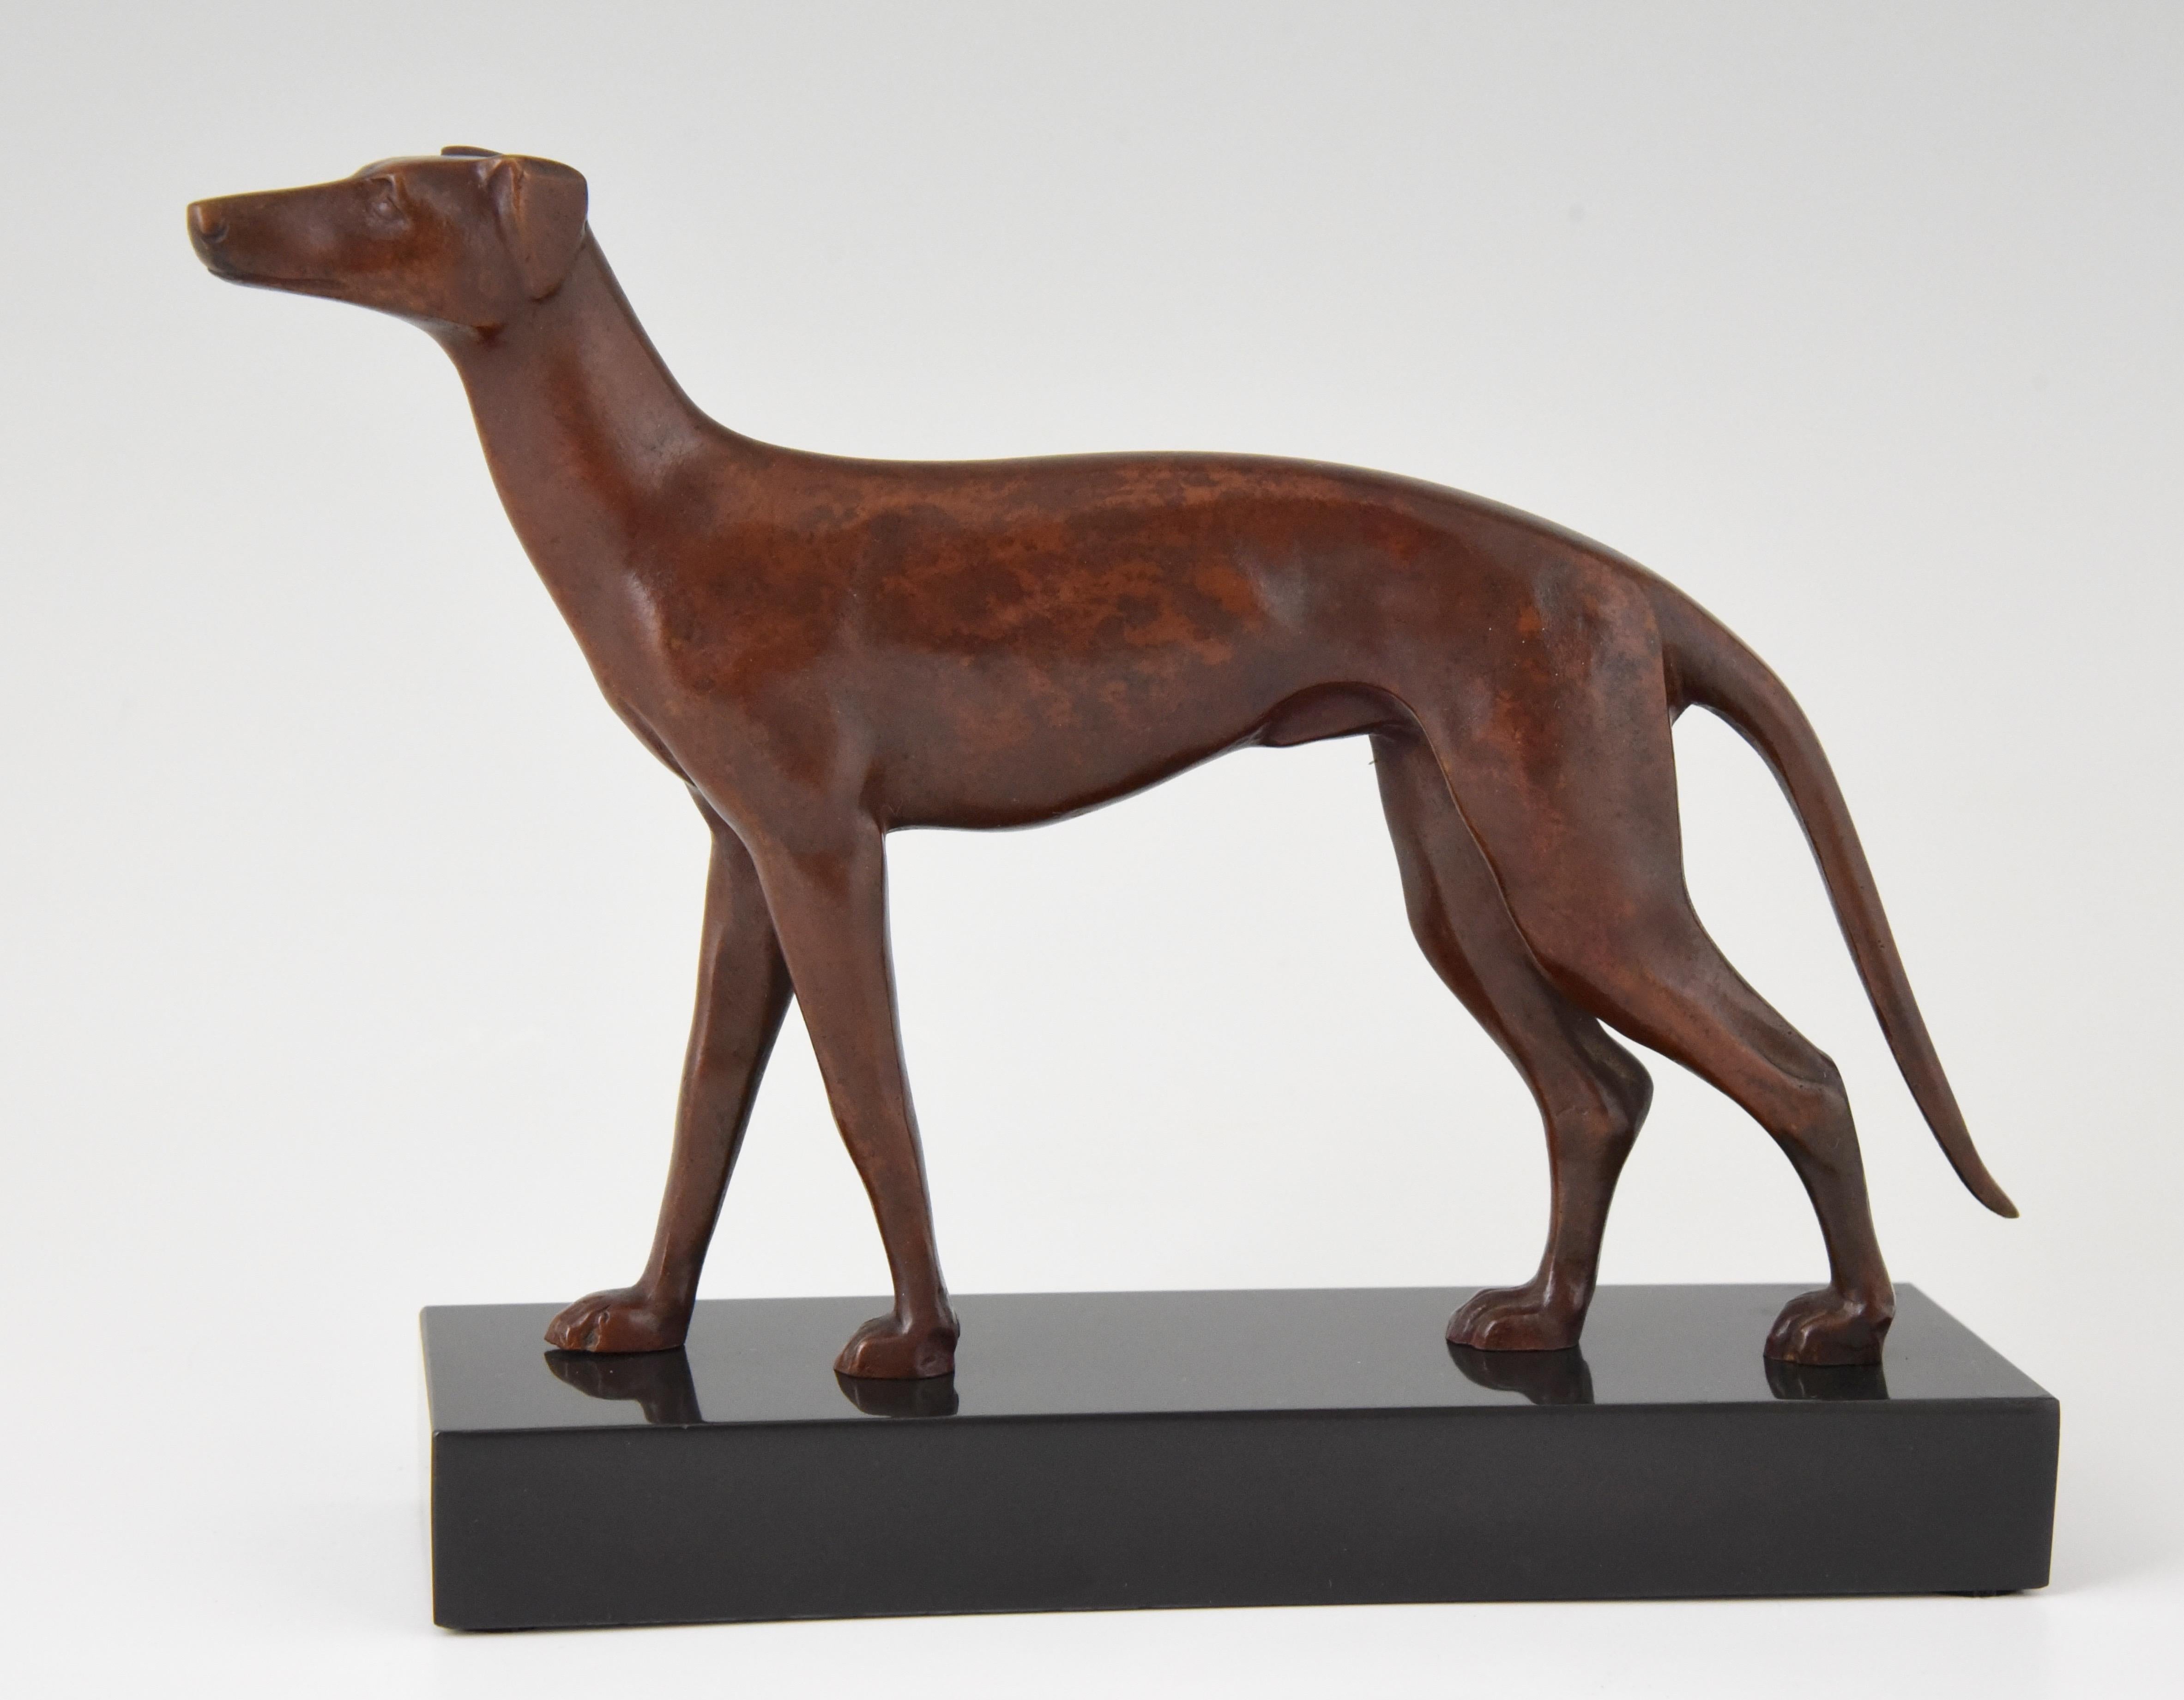 Elegant Art Deco bronze sculpture of a greyhound dog. The bronze is signed by the French artist Jean Luc and stands on a Belgian black marble base, circa 1930.